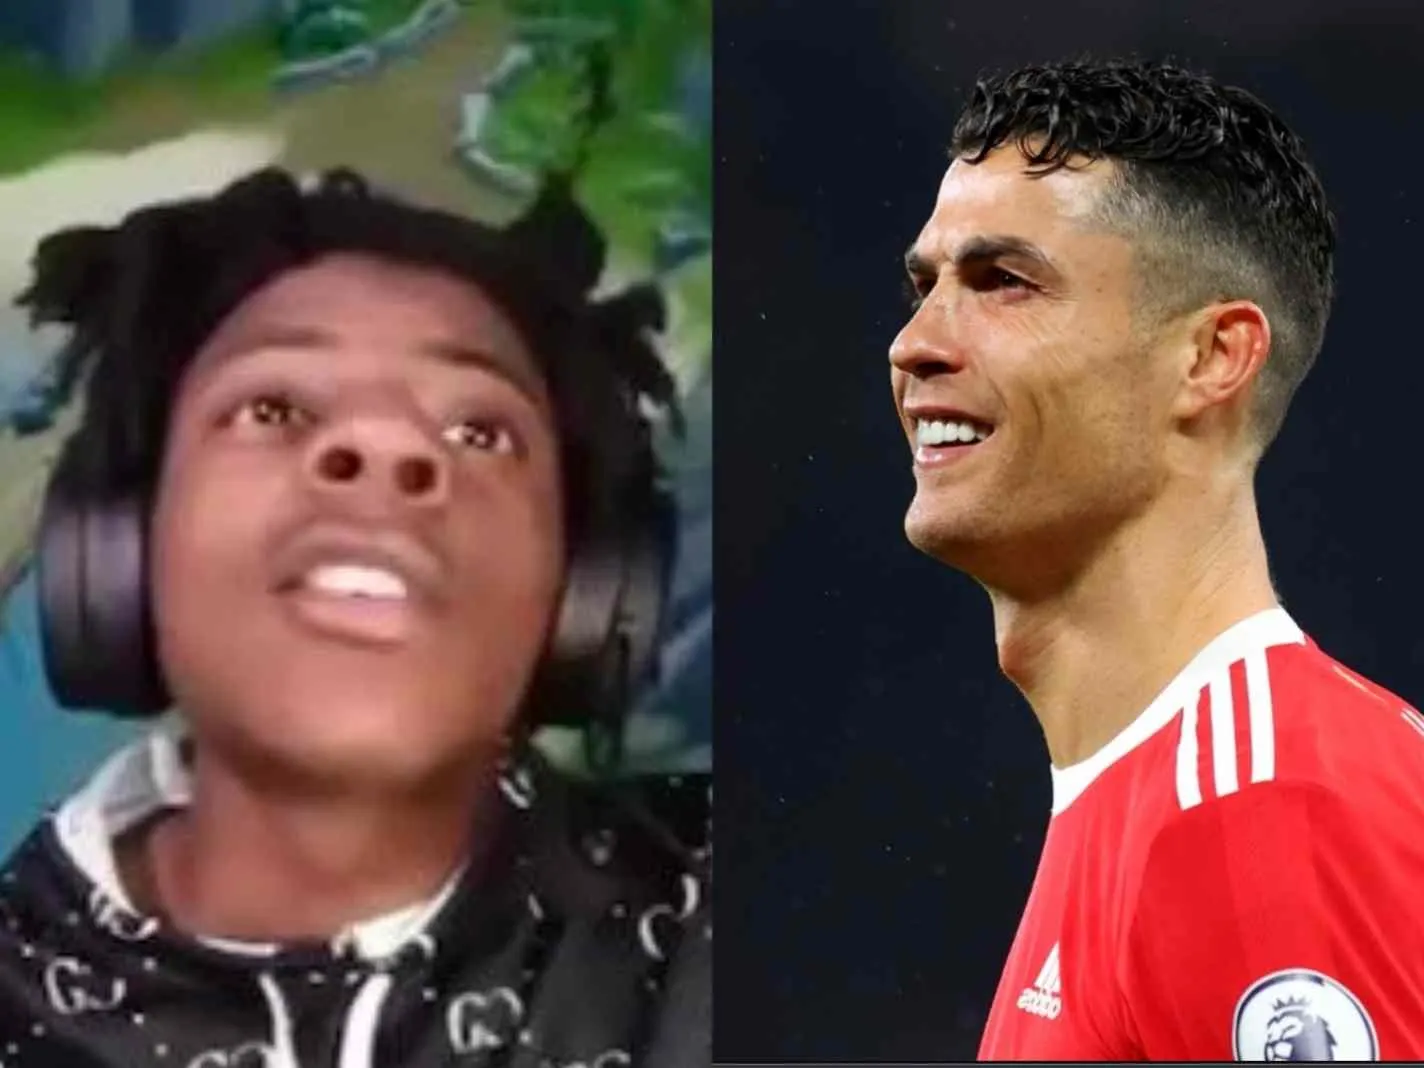 The image shows YouTuber Ishowspeed and Cristiano Ronaldo